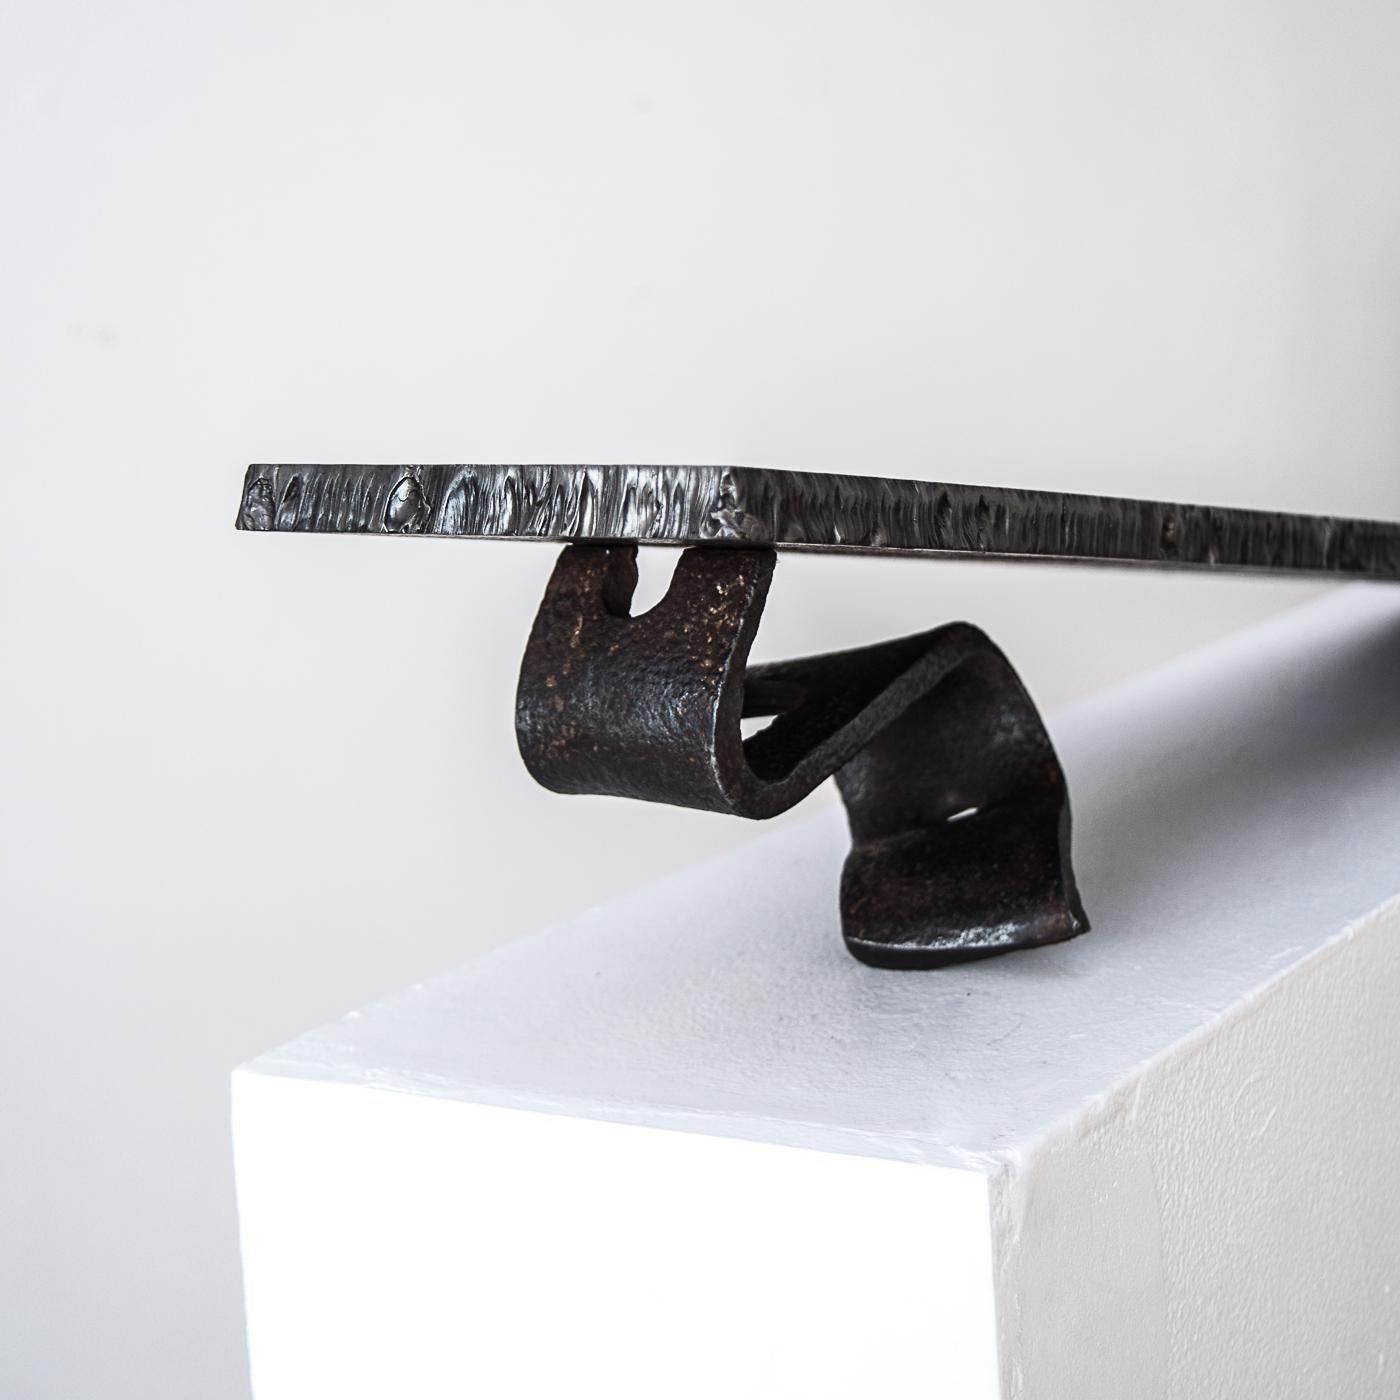 Ramp
steel
Measures: 6 x 8 x 42 in.

Artist statement:

I seldom use stock material, but prefer distressed and rusted steel that has been scarred, bent, and made imperfect. In this state, the material becomes quite beautiful. There are figurative